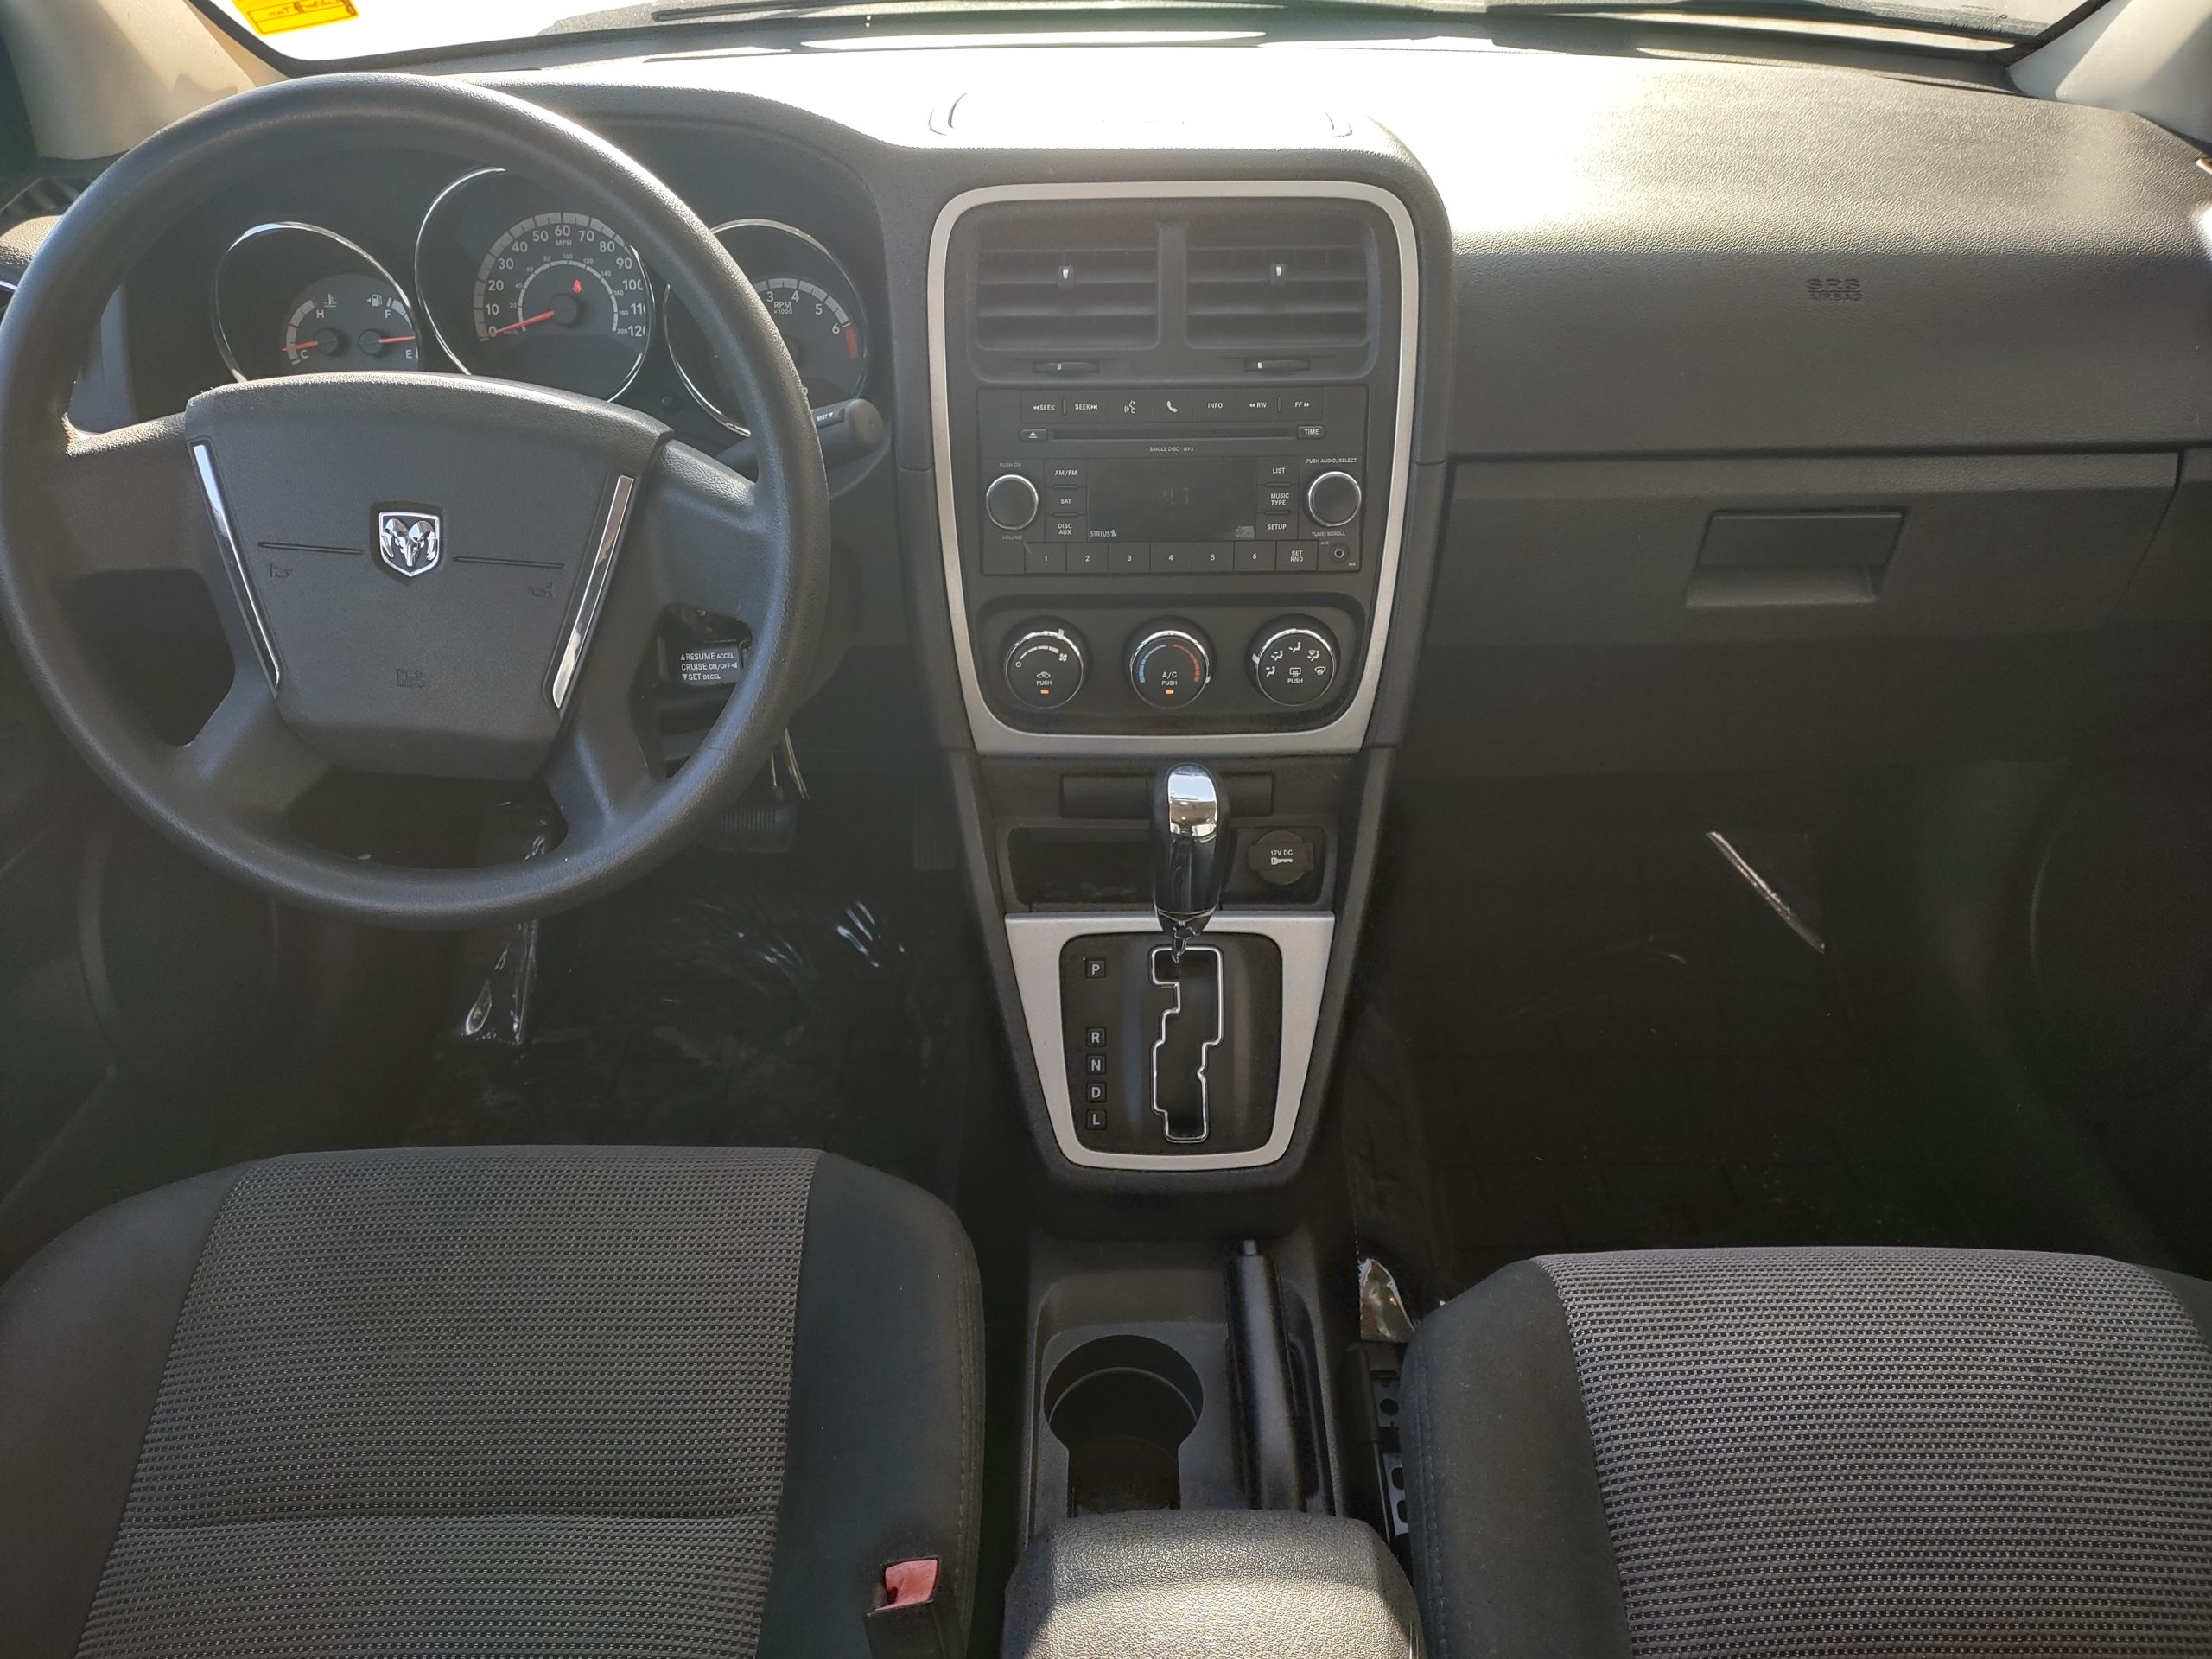 Used 2010 Dodge Caliber SXT HB for sale in 